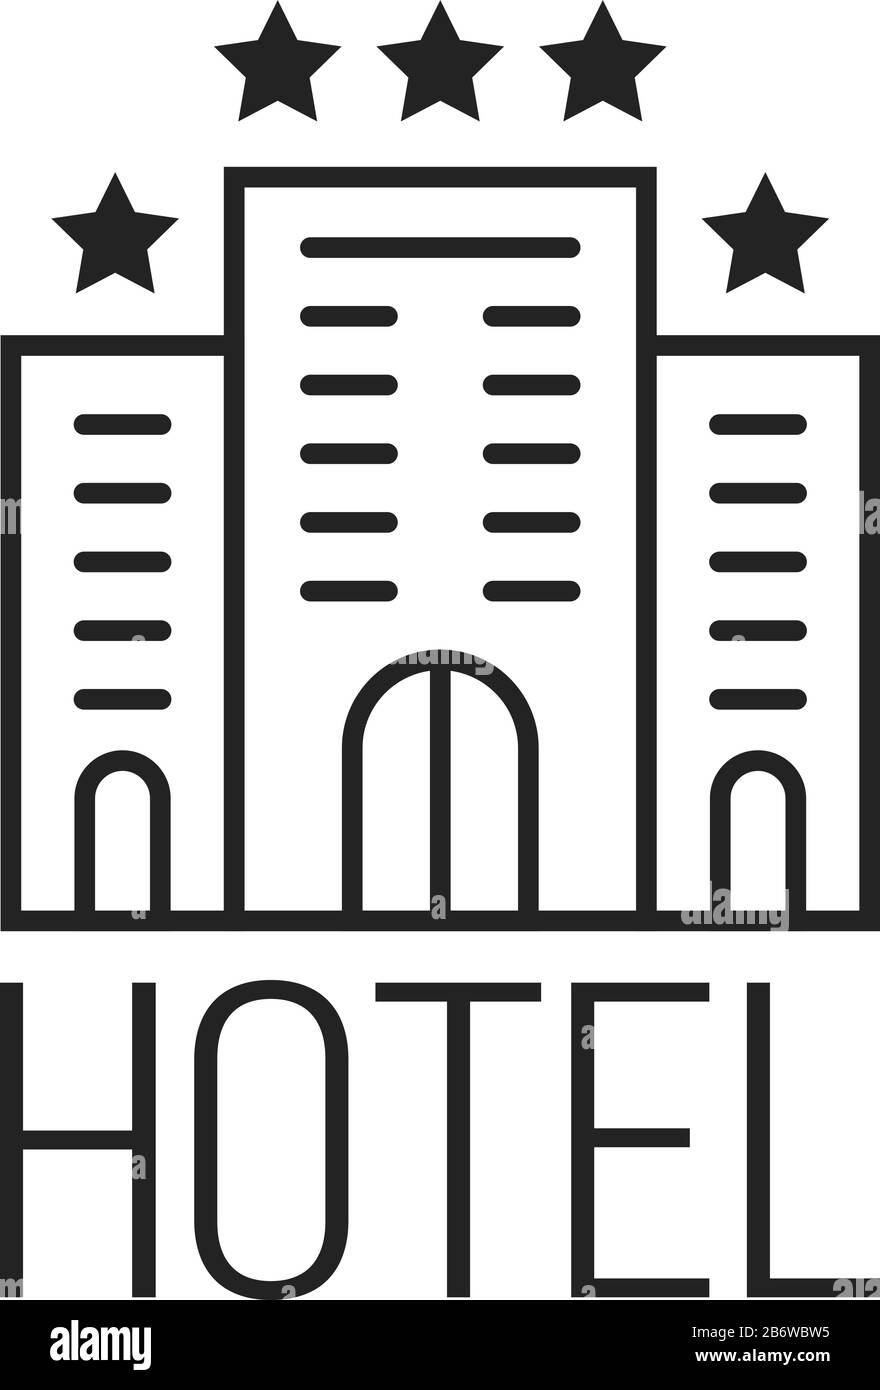 linear simple icon of luxury hotel with stars Stock Vector